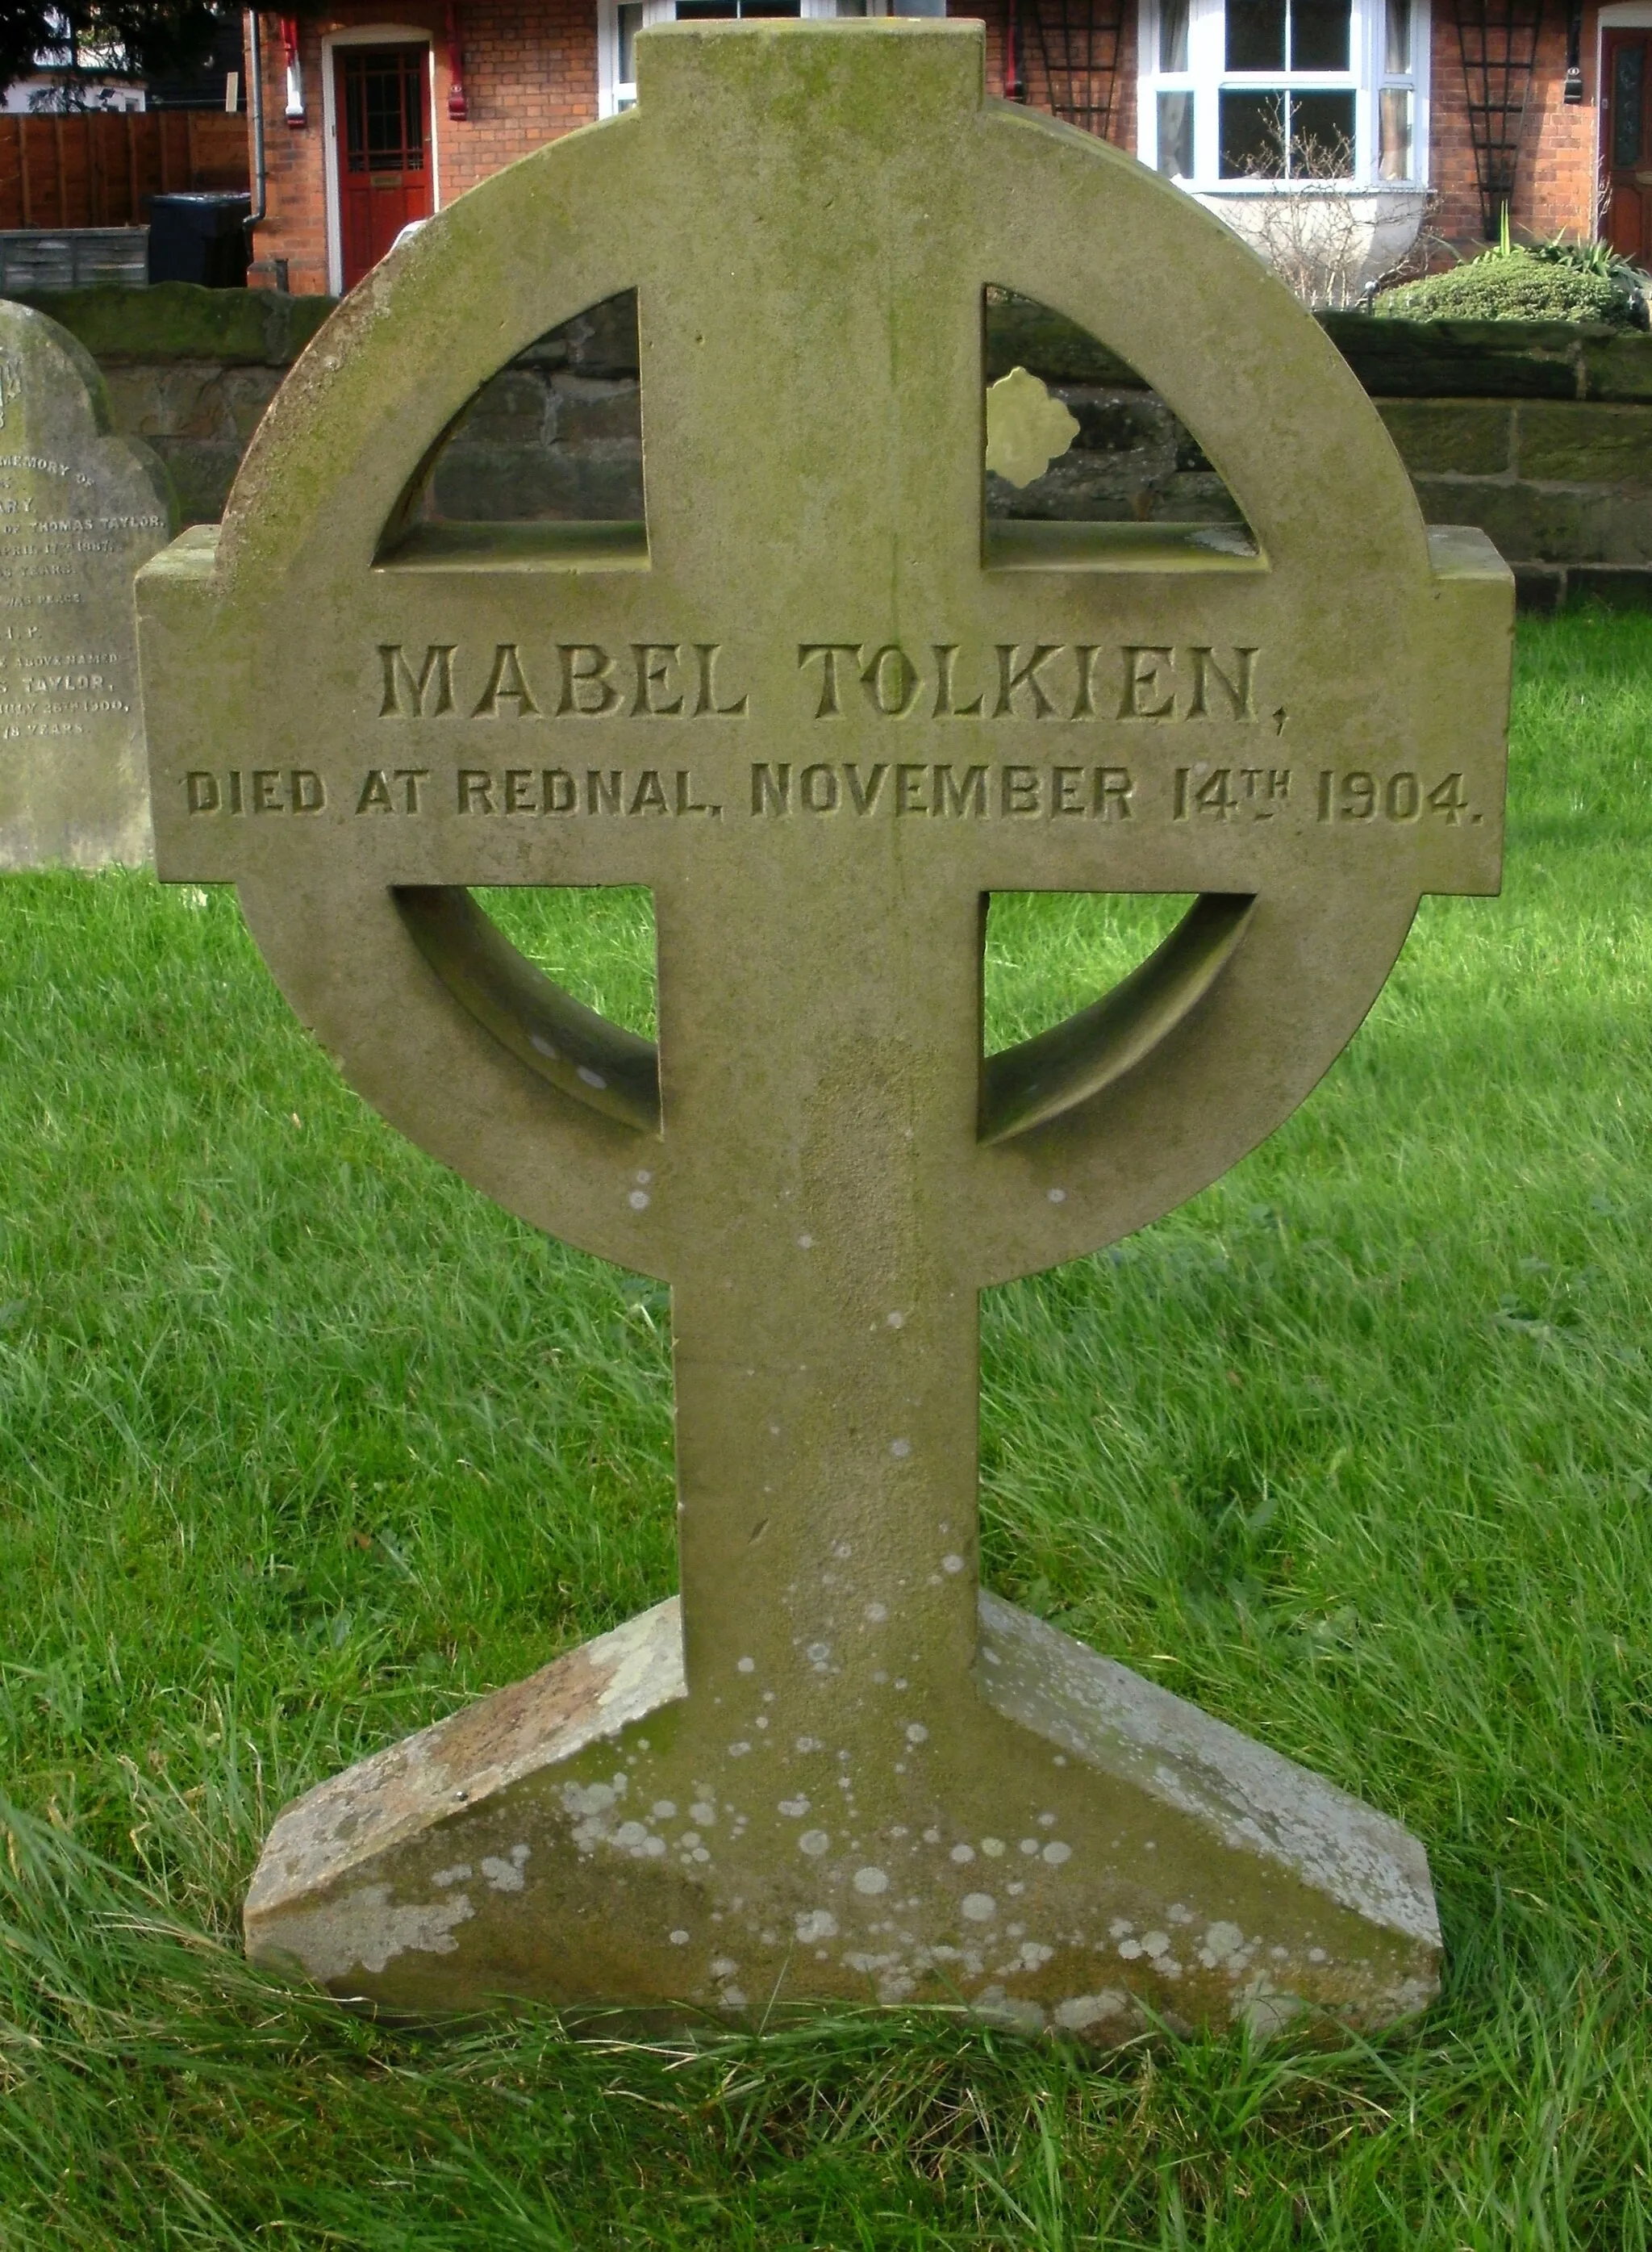 Photo showing: St Peter's Catholic Church, Bromsgrove: grave of Mabel Tolkien (née Suffield, 1870–1904), the mother of J. R. R. Tolkien.